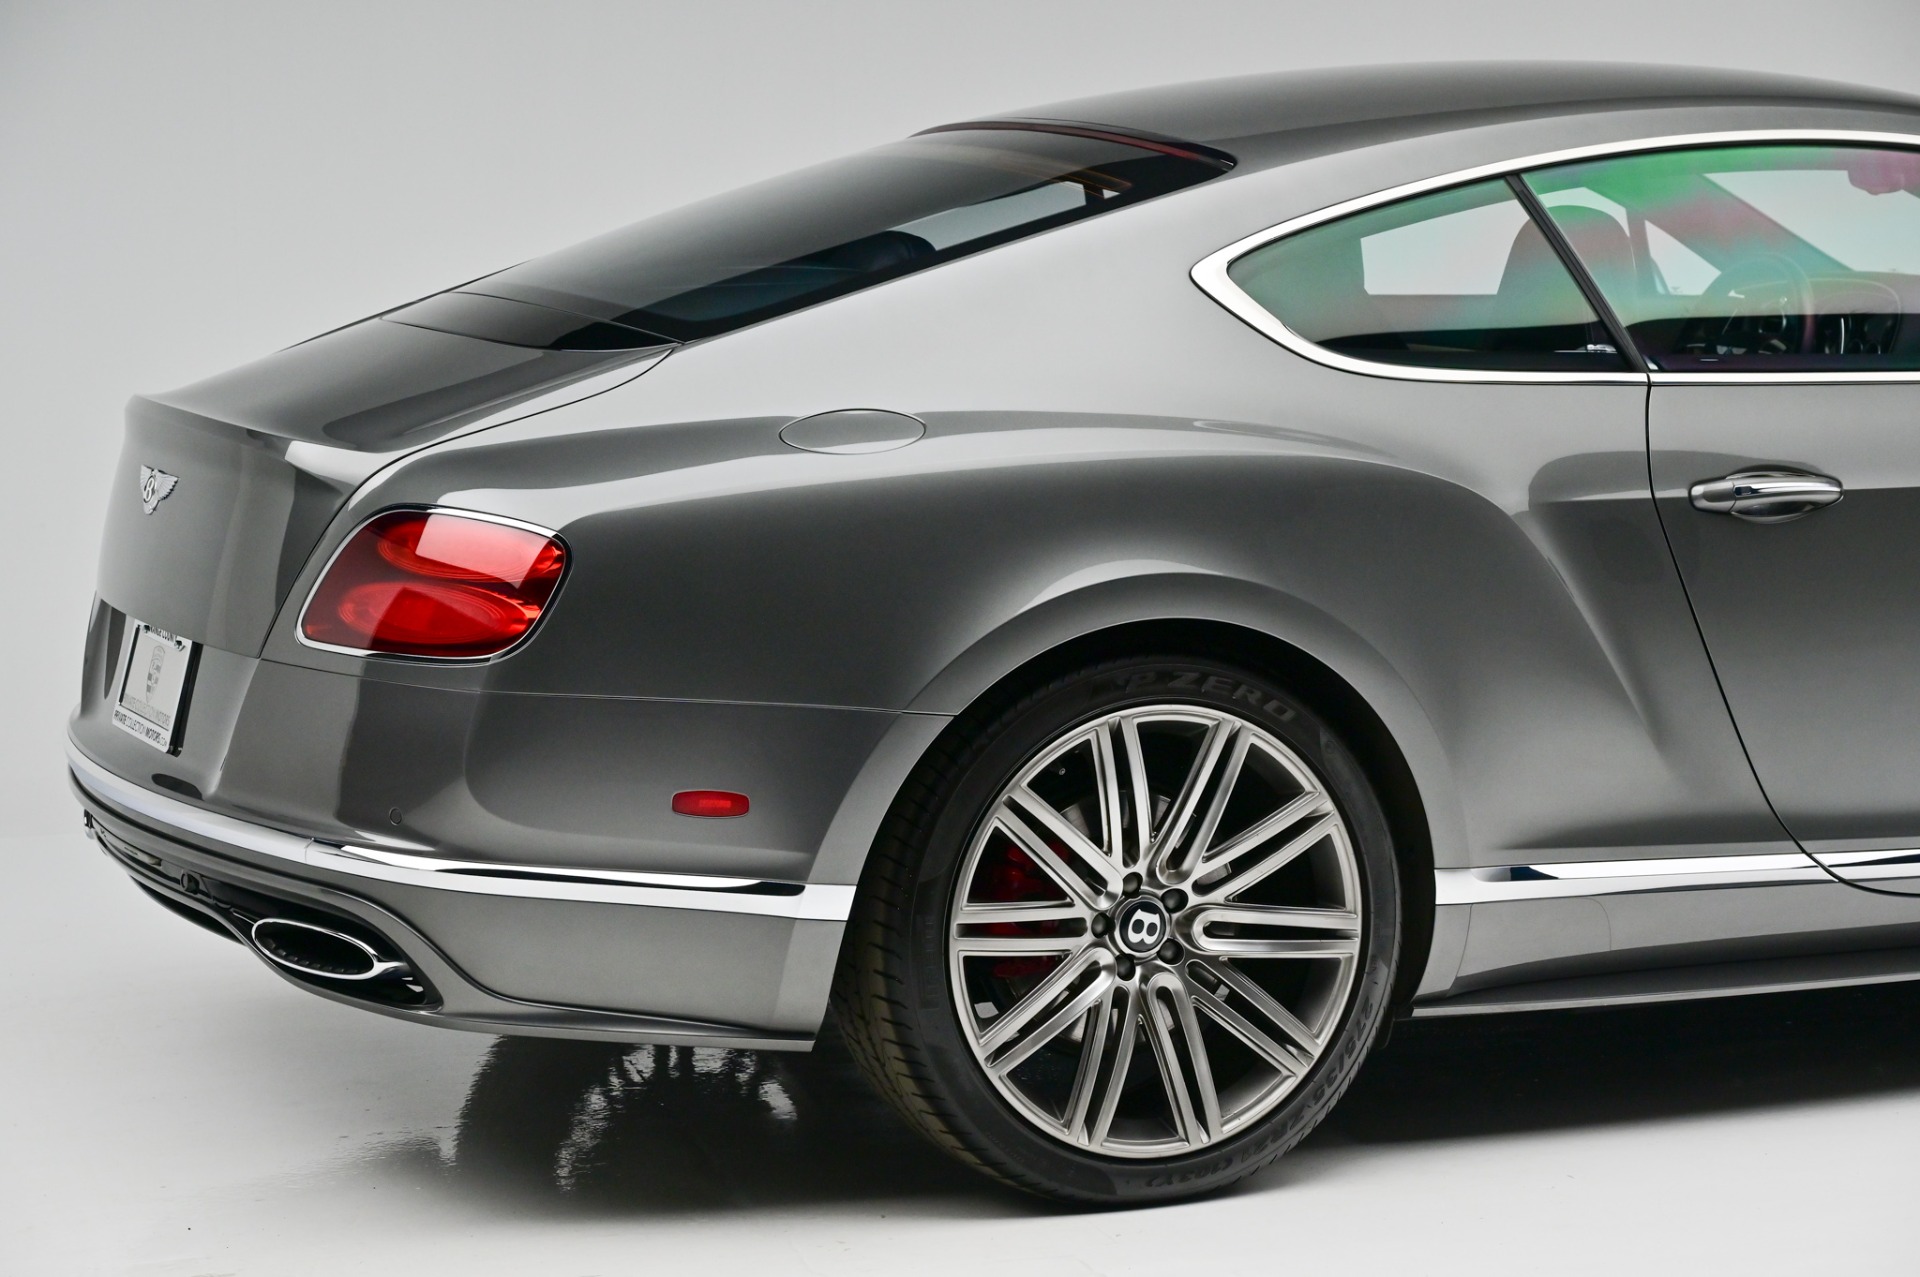 Used 2016 Bentley Continental GT Speed $260,605 MSRP For Sale 